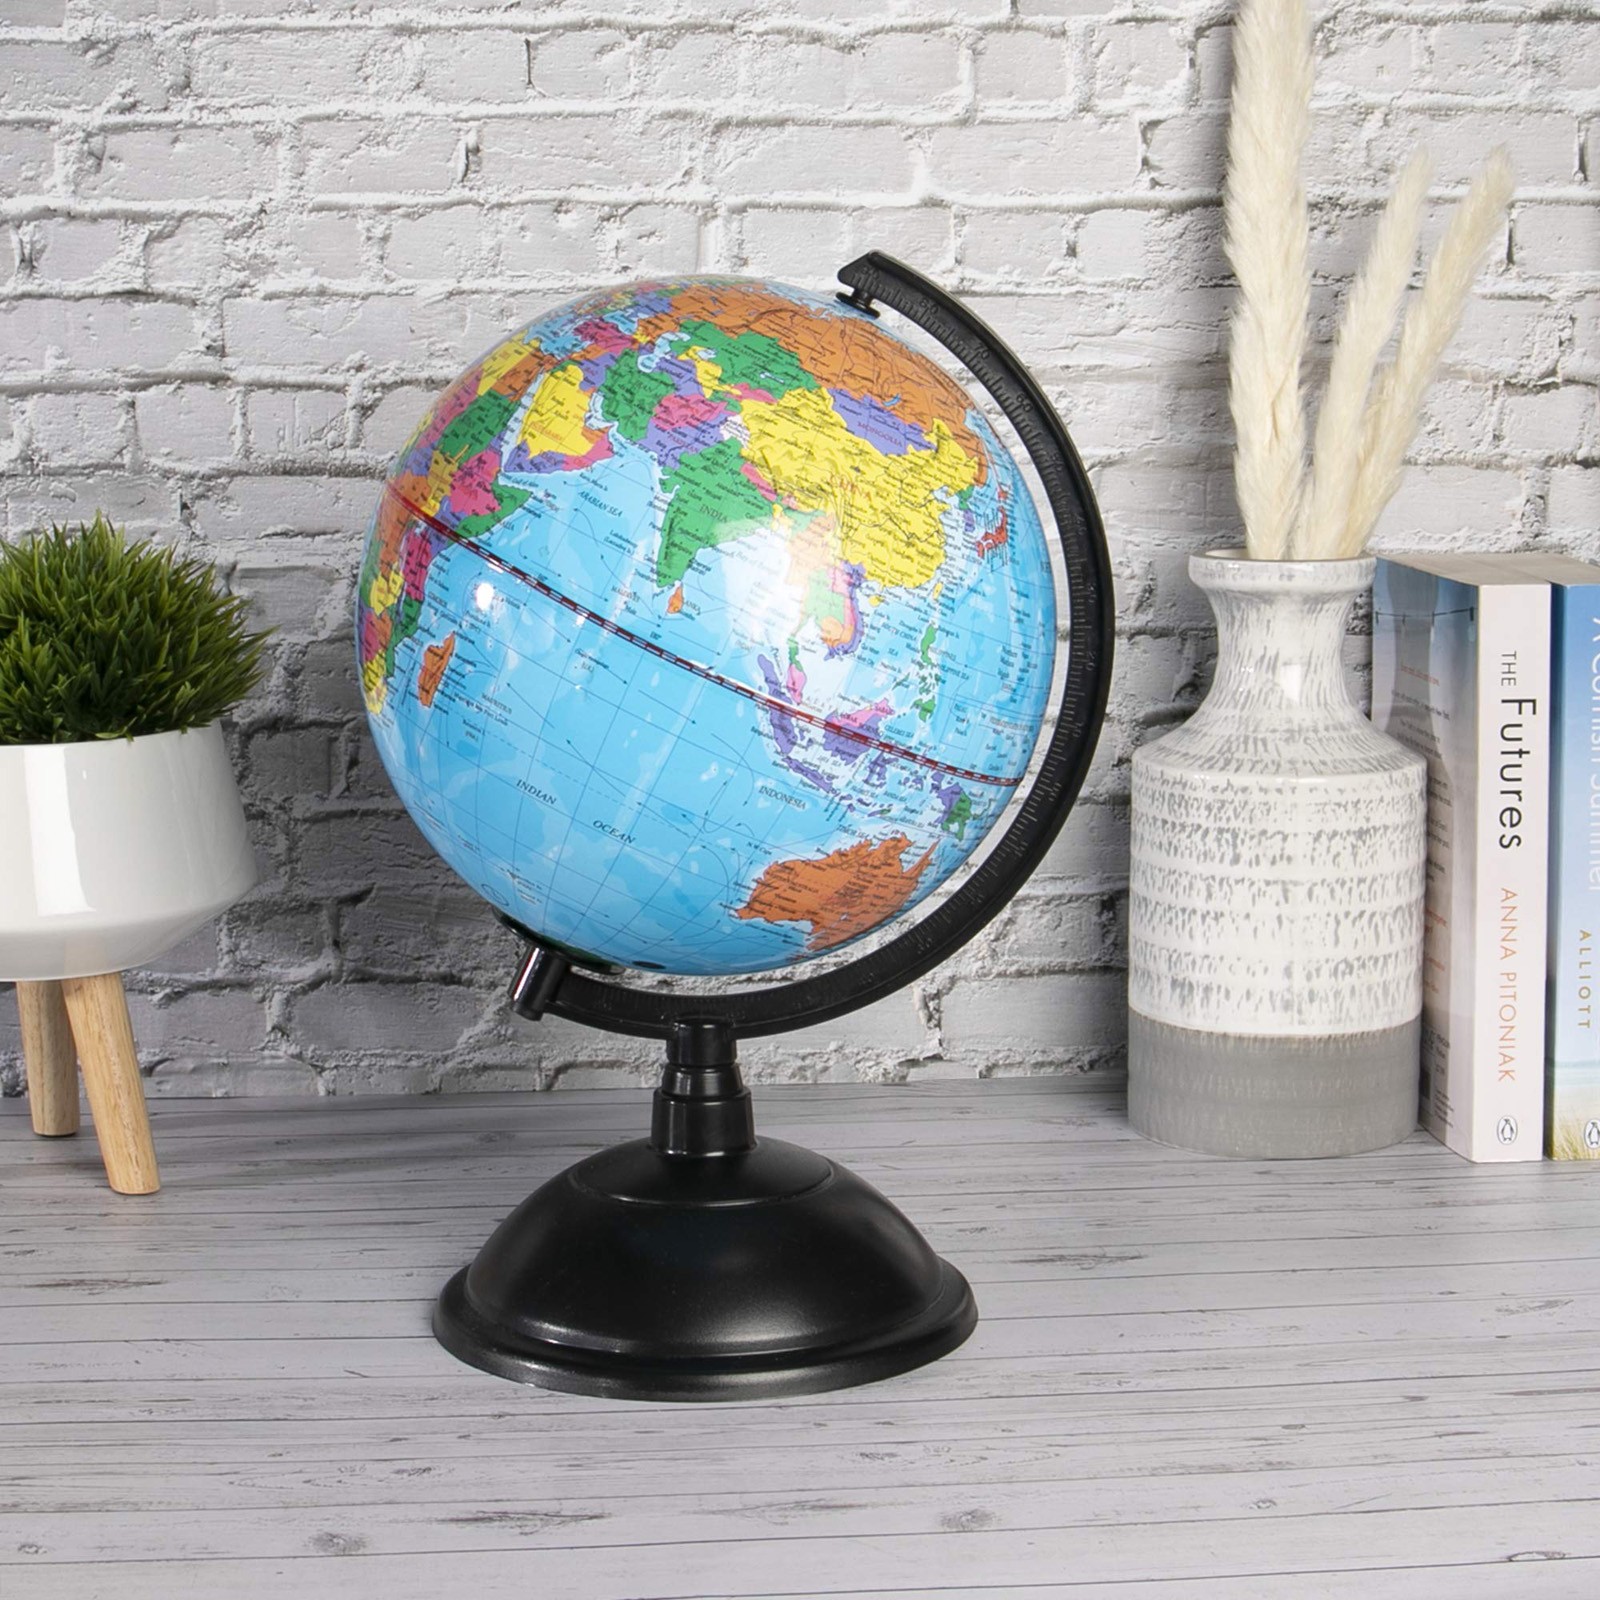 Colourful Rotating Globe World Globe Model World Map for Home Office Geography Teaching Decor Students Teaching Aids Kids Toy